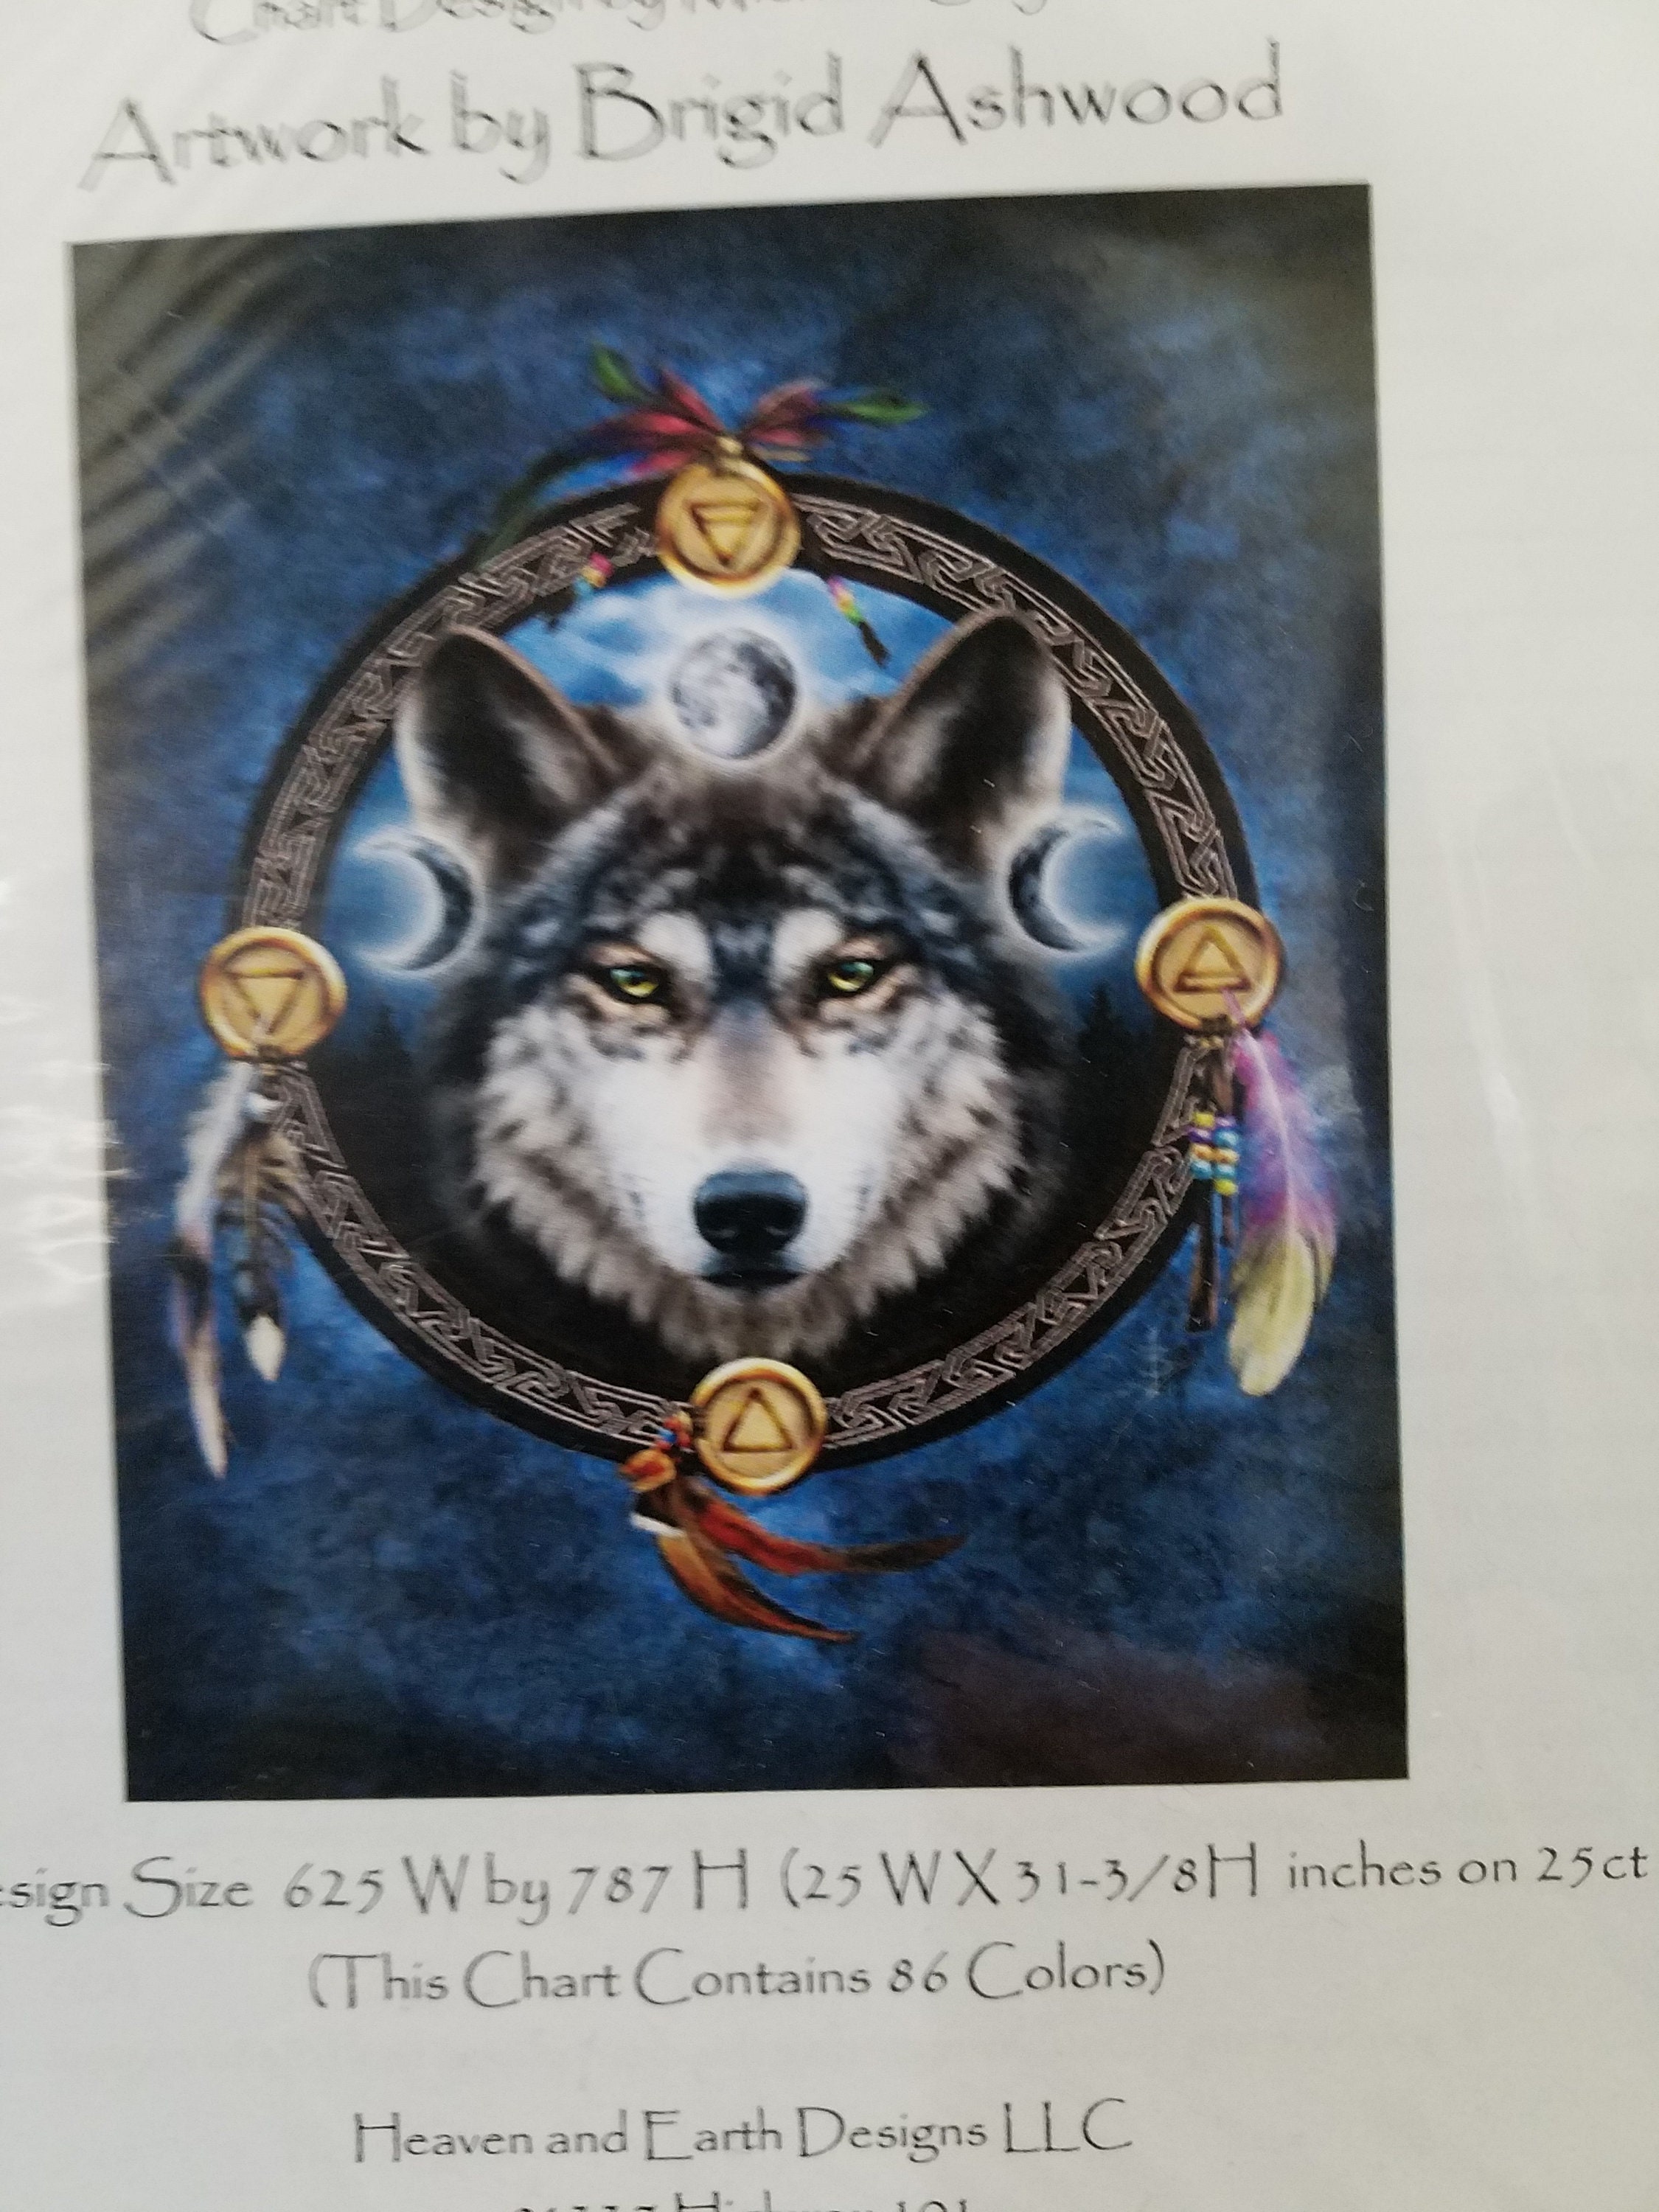 Wolf Wilderness Song Waste Canvas Cross Stitch Pattern CHART from a magazine